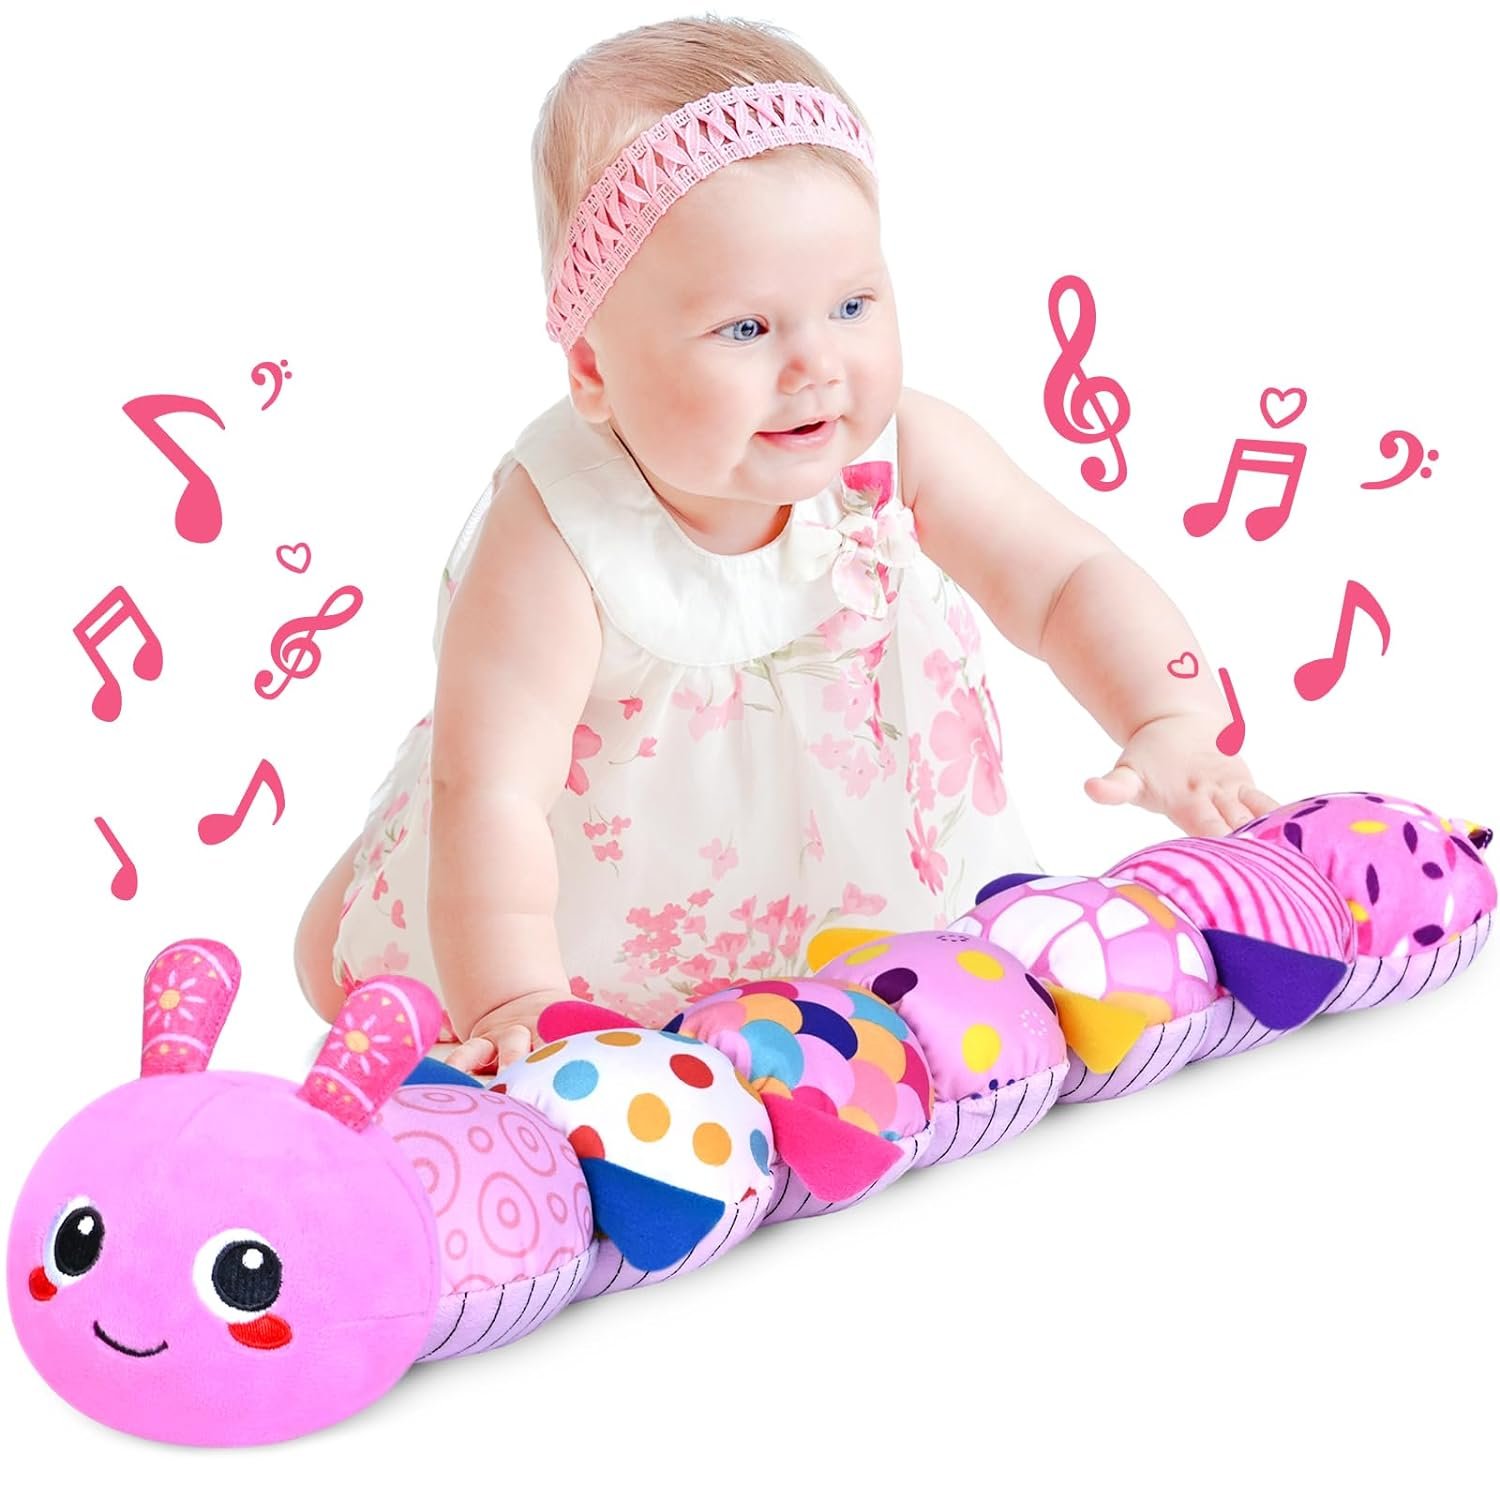 KMUYSL Infant Baby Musical Stuffed Animal Caterpillar Toy Review